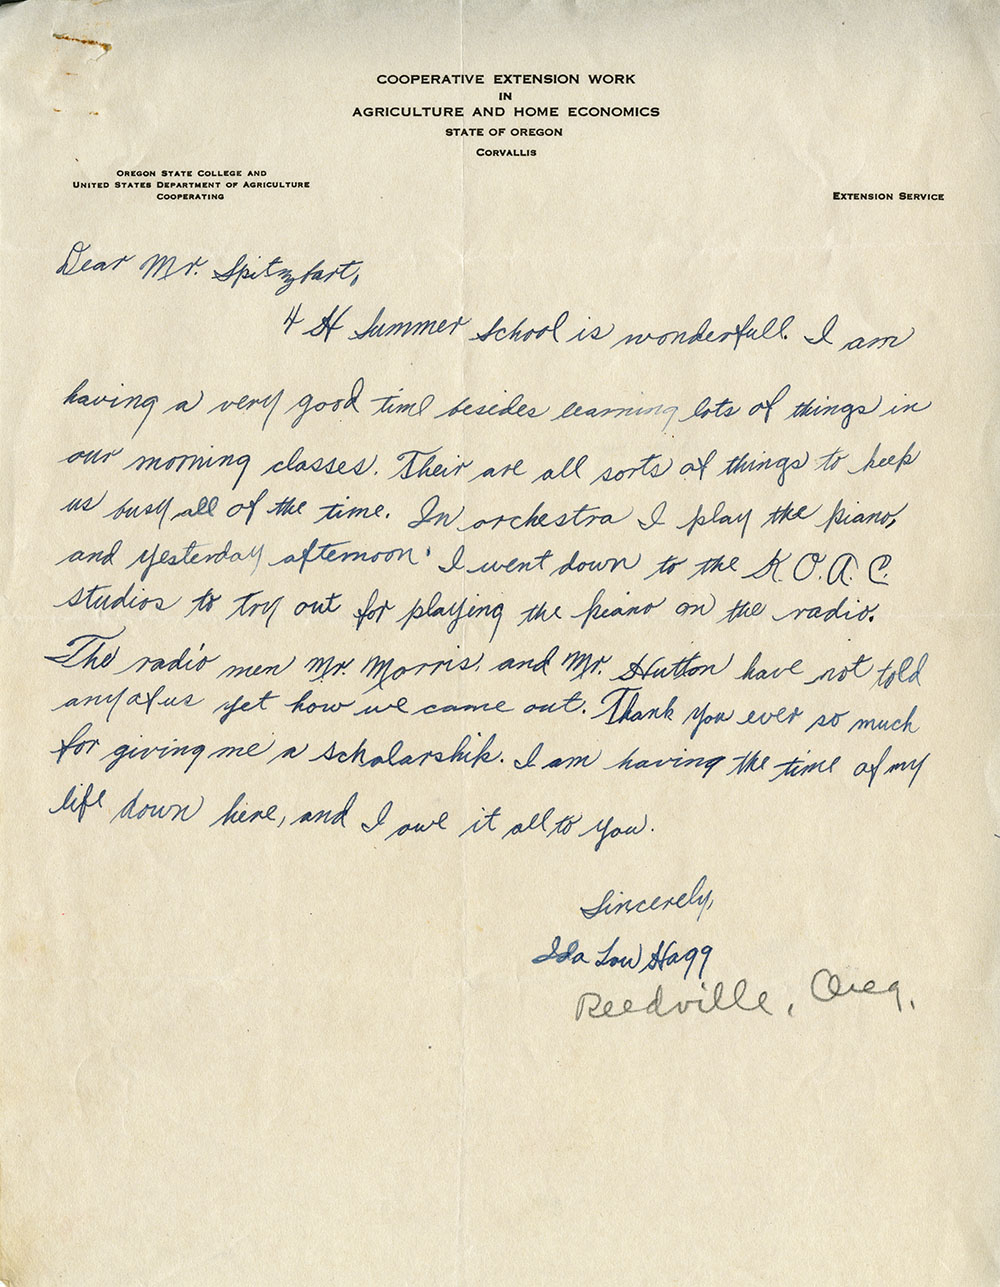 A letter from Ida Lou Hagg to Leo Spitzbart